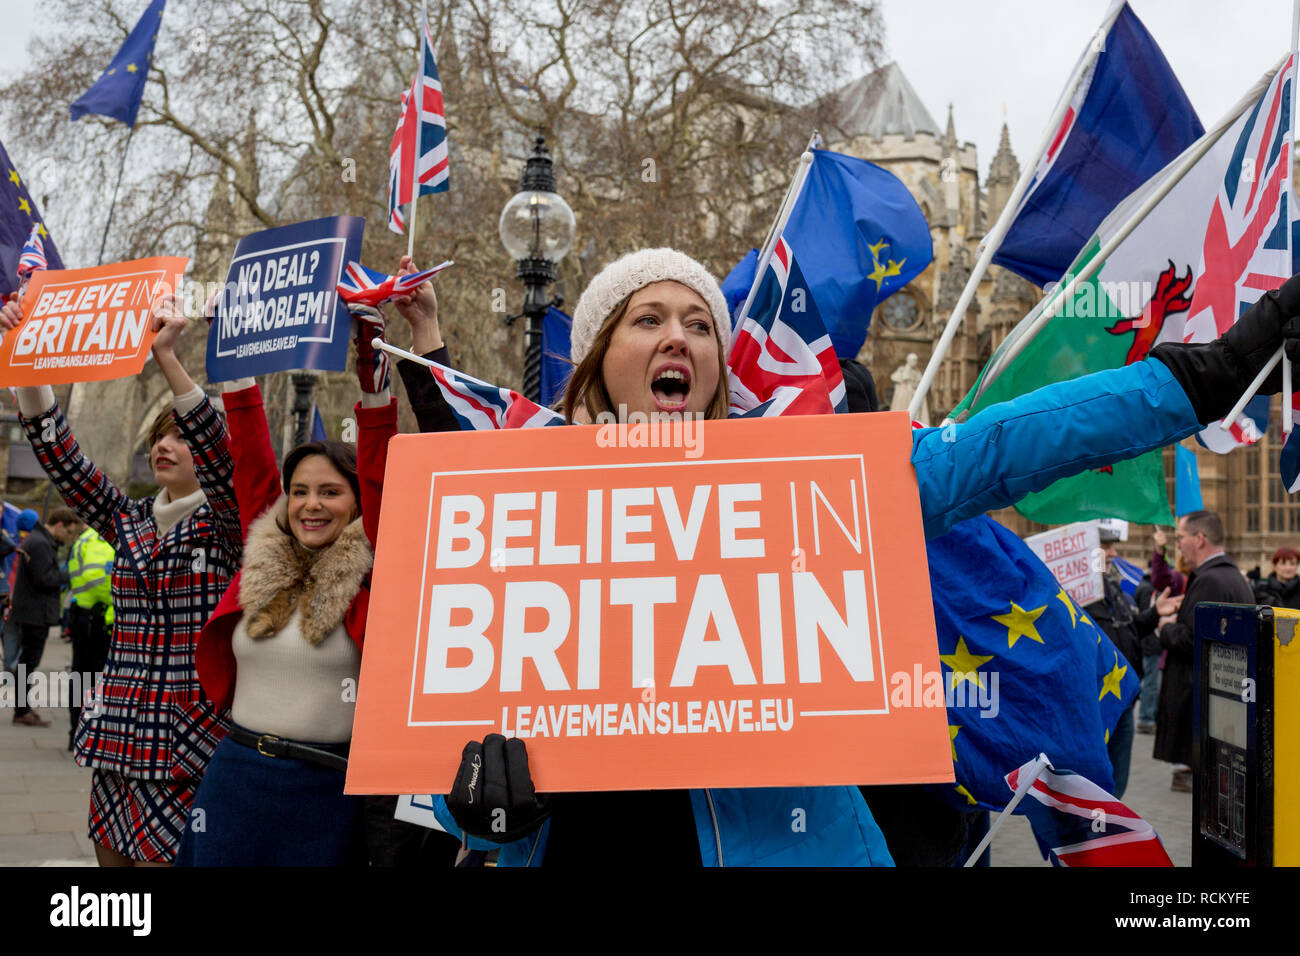 On the day that Prime Minister Theresa May's Meaningful Brexit vote is taken in the UK Parliament, Leave supporters protest opposite the House of Commons, on 15th January 2019, in Westminster, London, England. Stock Photo